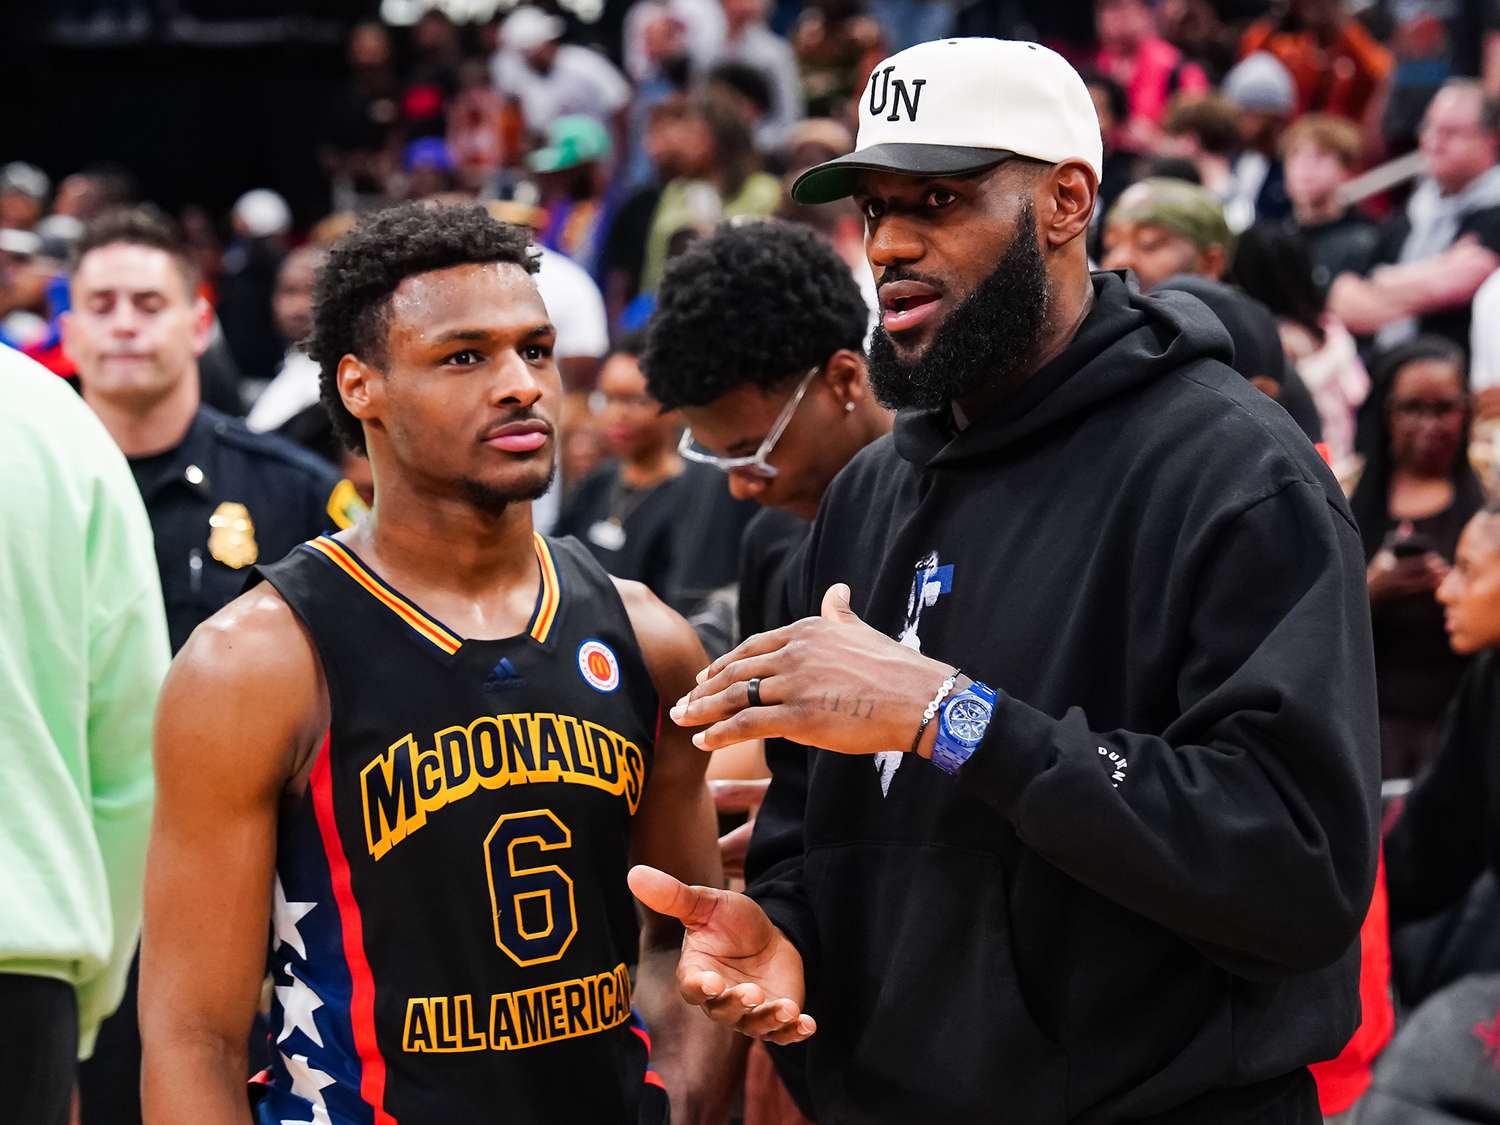 LeBron James Says He Had Major 'Anxiety' Watching Son Bronny Play at USC